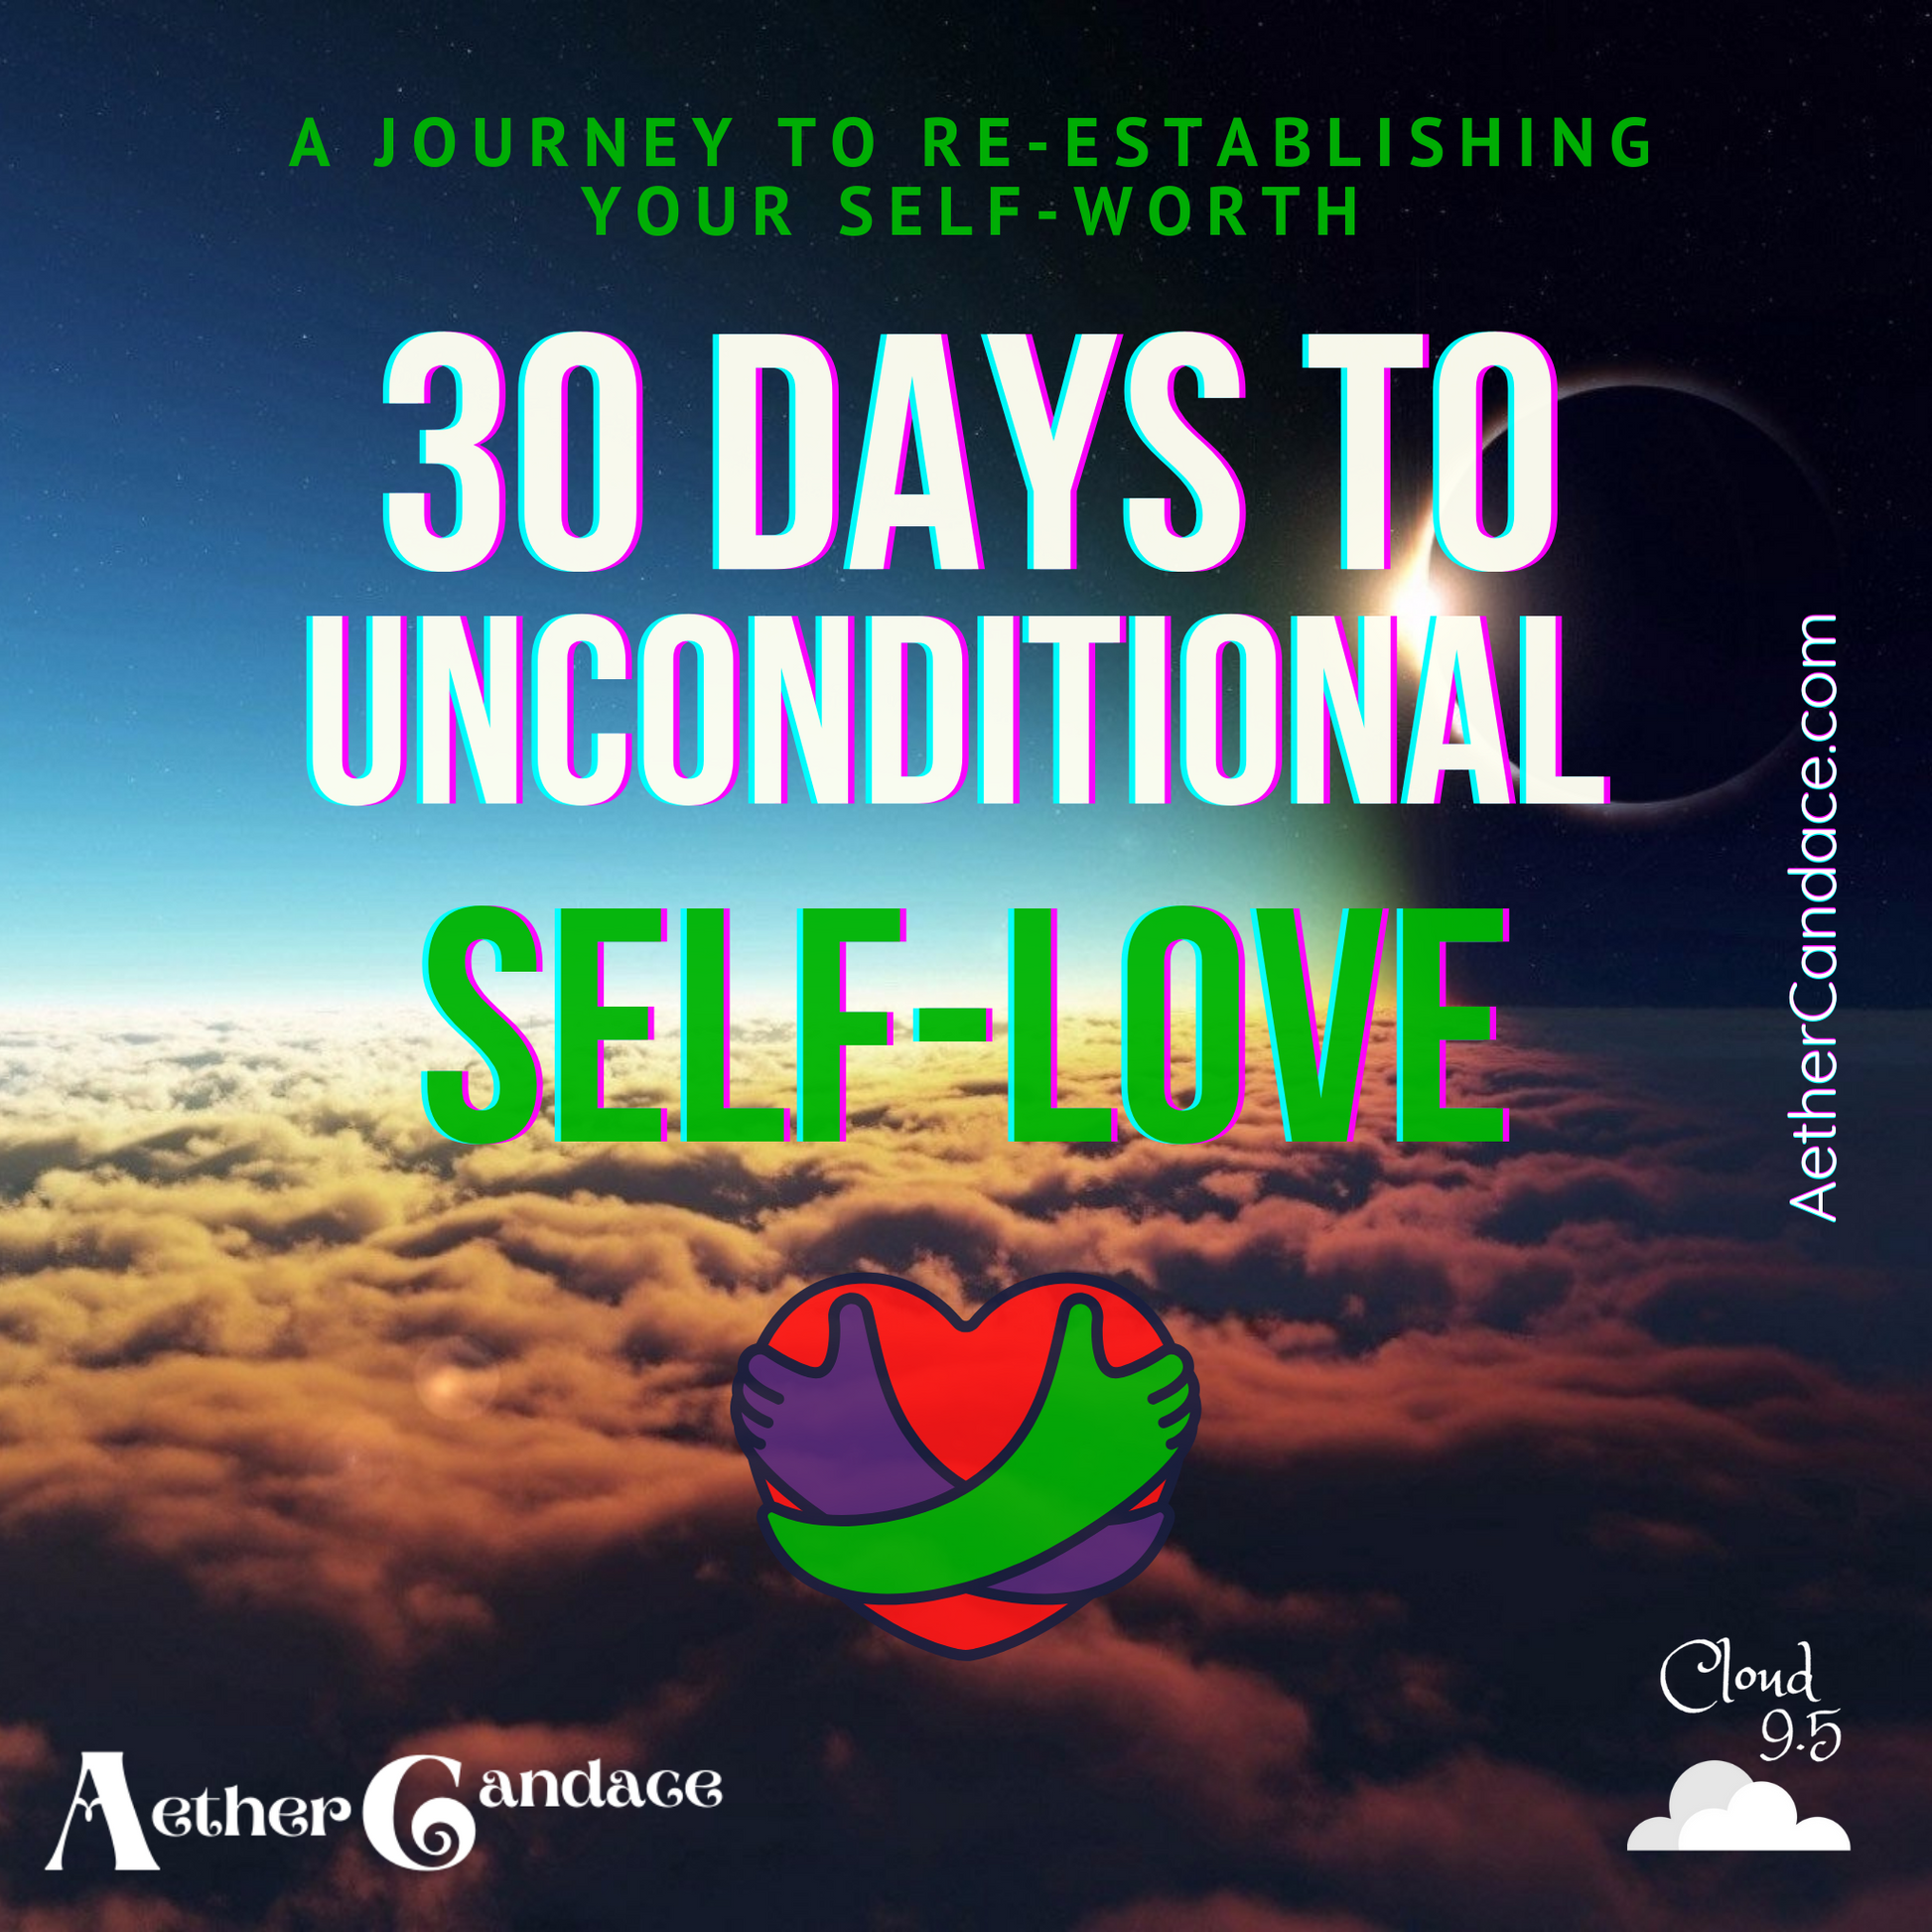 30 Days to Unconditional Self-Love - eBook | Cloud 9.5 - Metaphysical Products, Services and Retreats